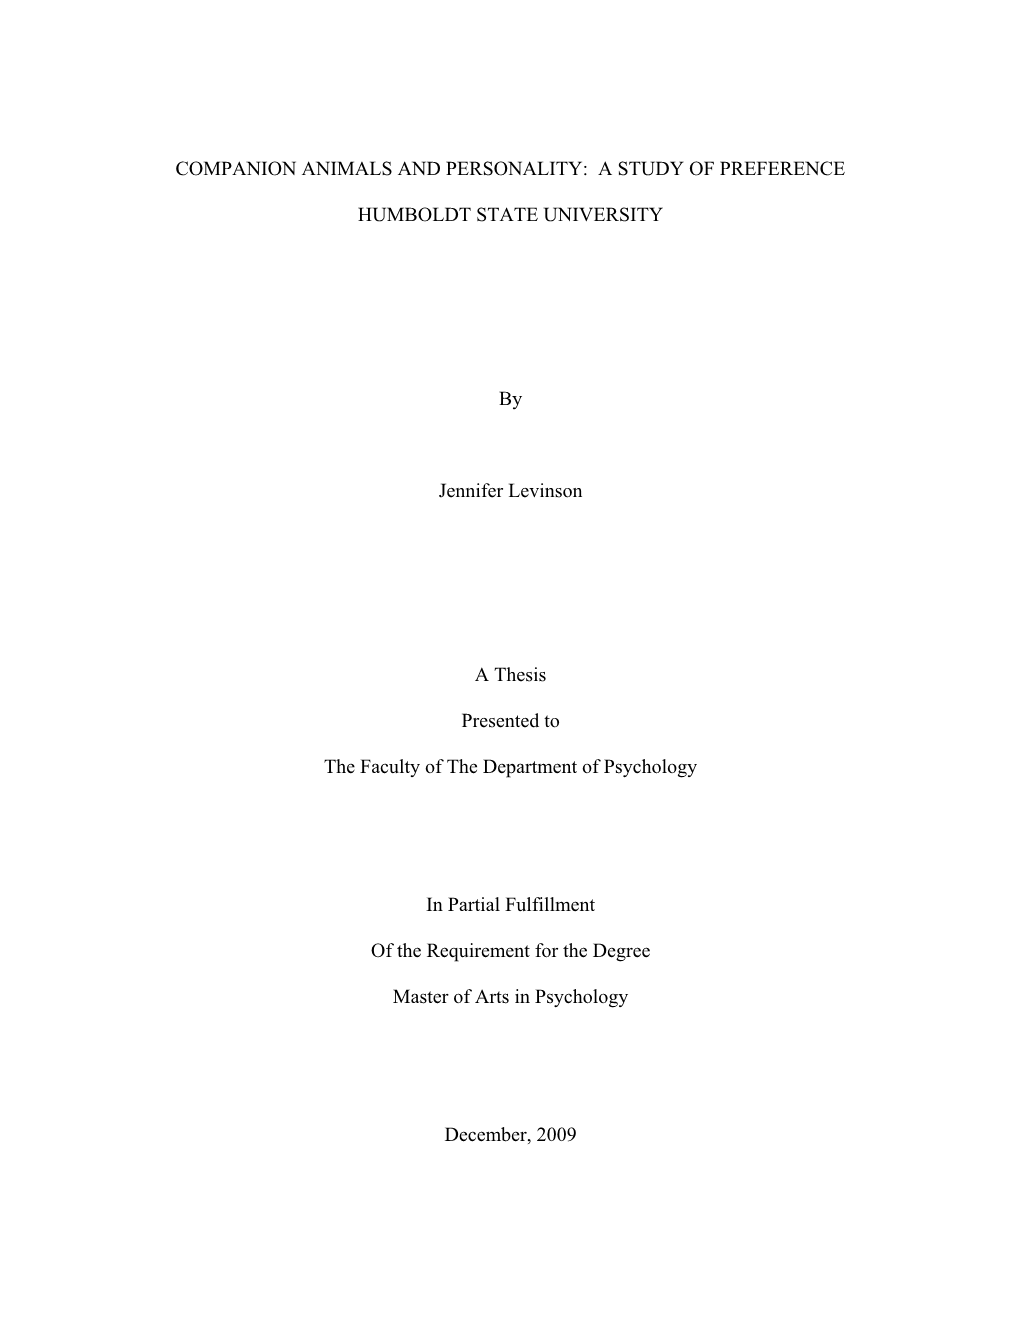 Companion Animals and Personality: a Study of Preference